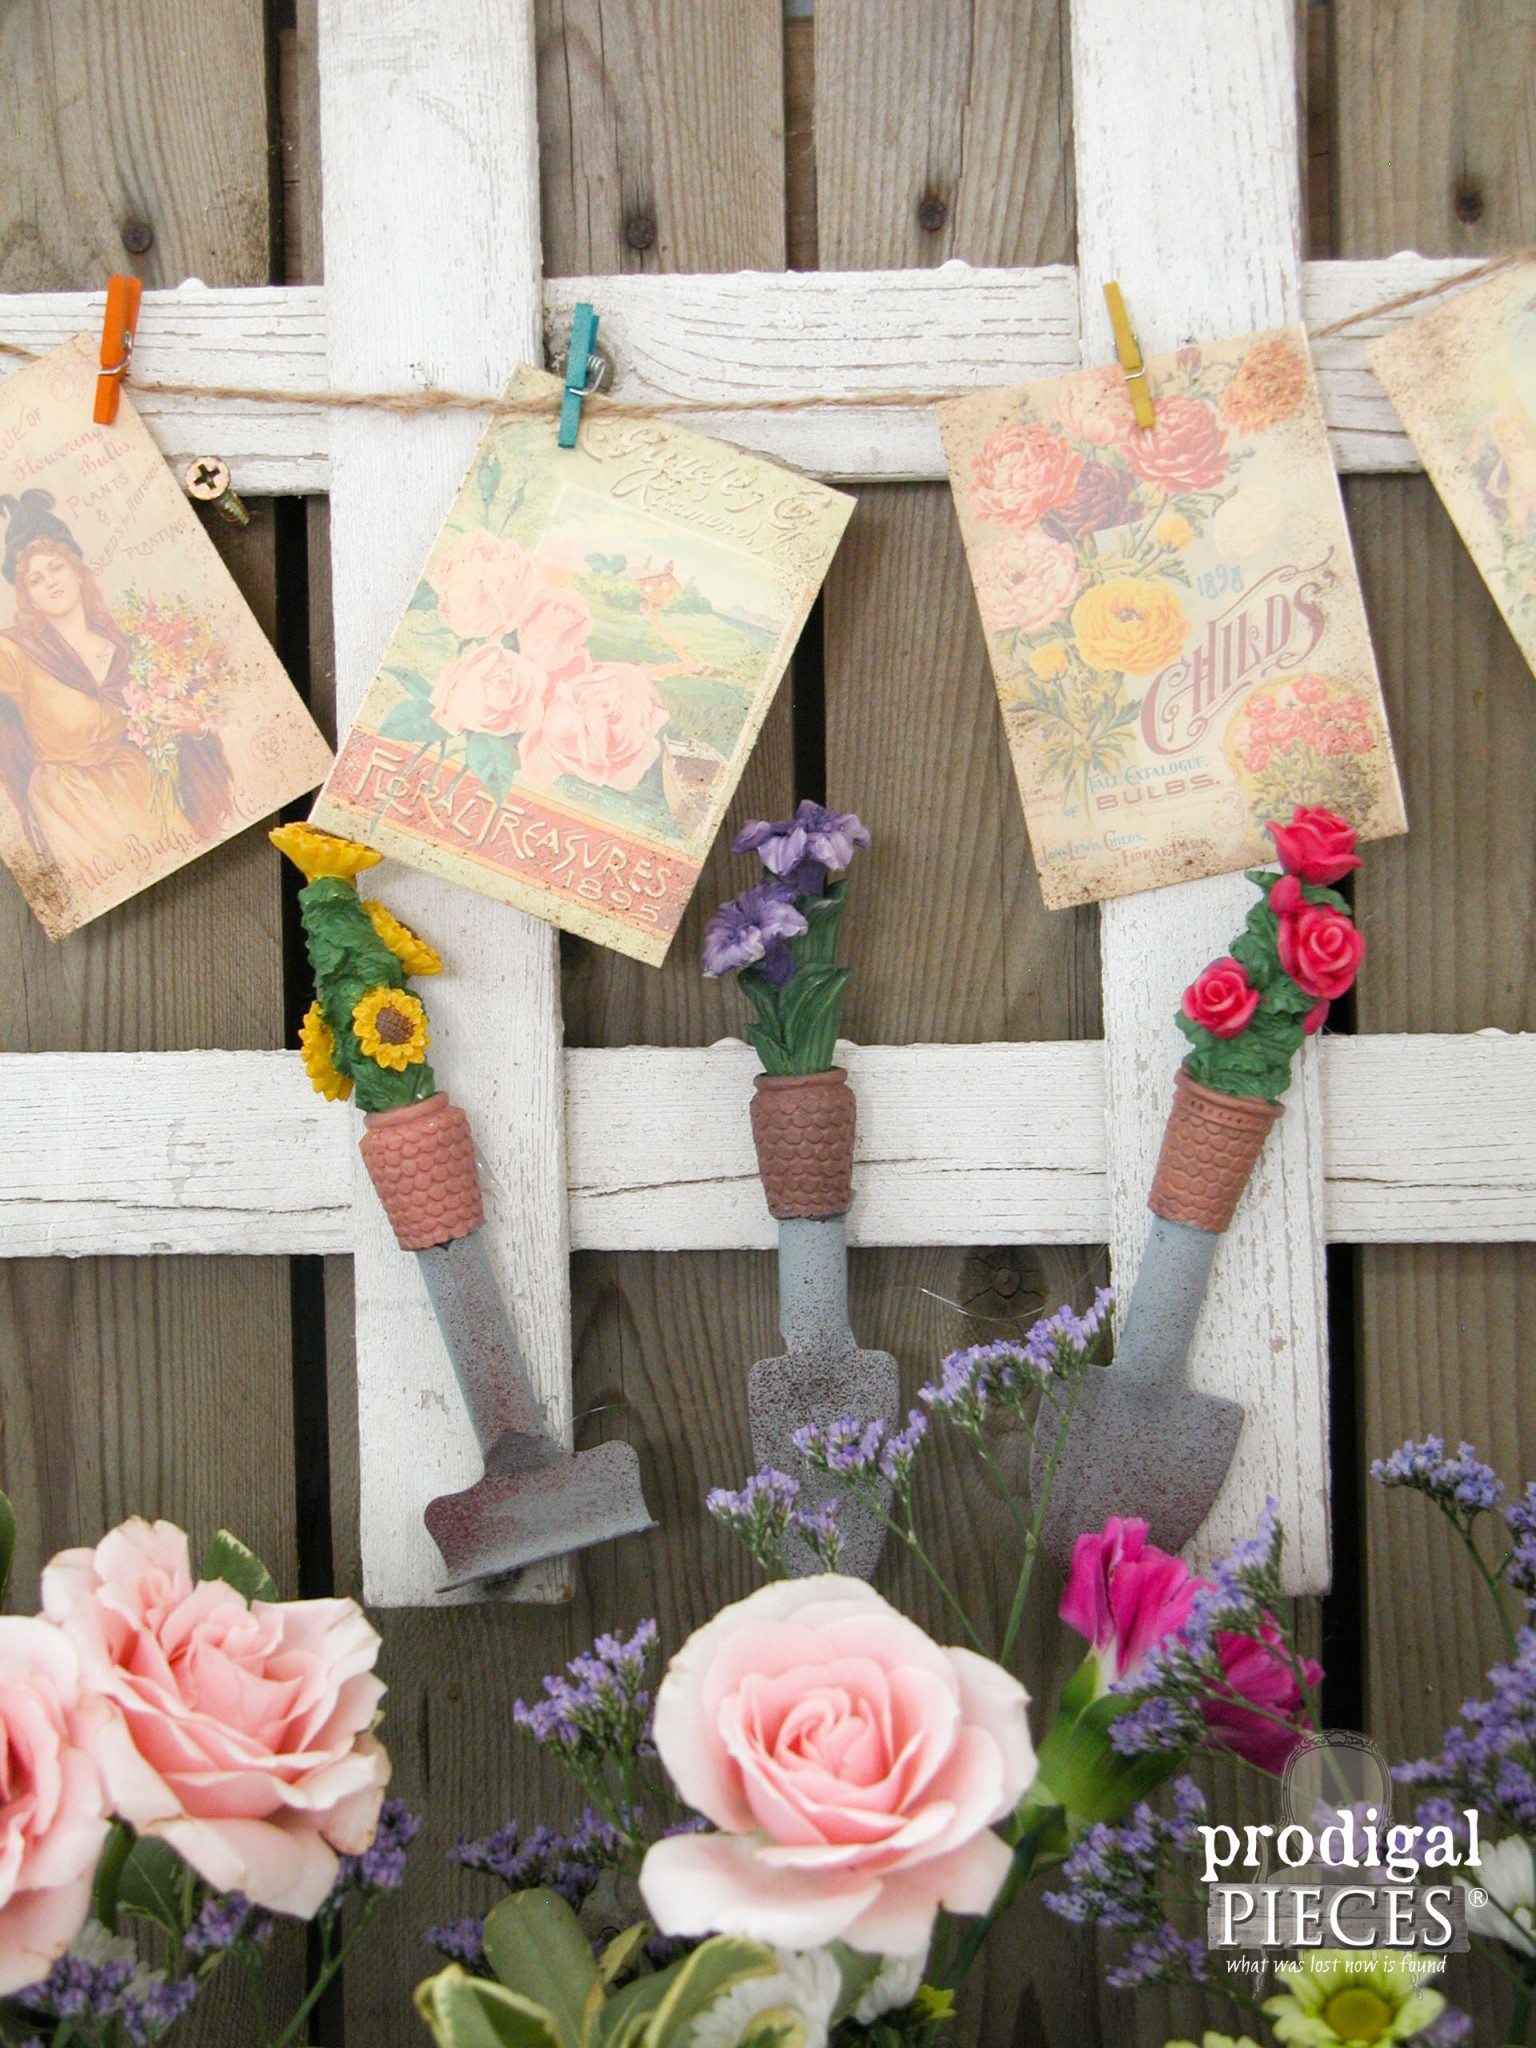 Garden Decor from Curbside Picket Fence by Prodigal Pieces | www.prodigalpieces.com